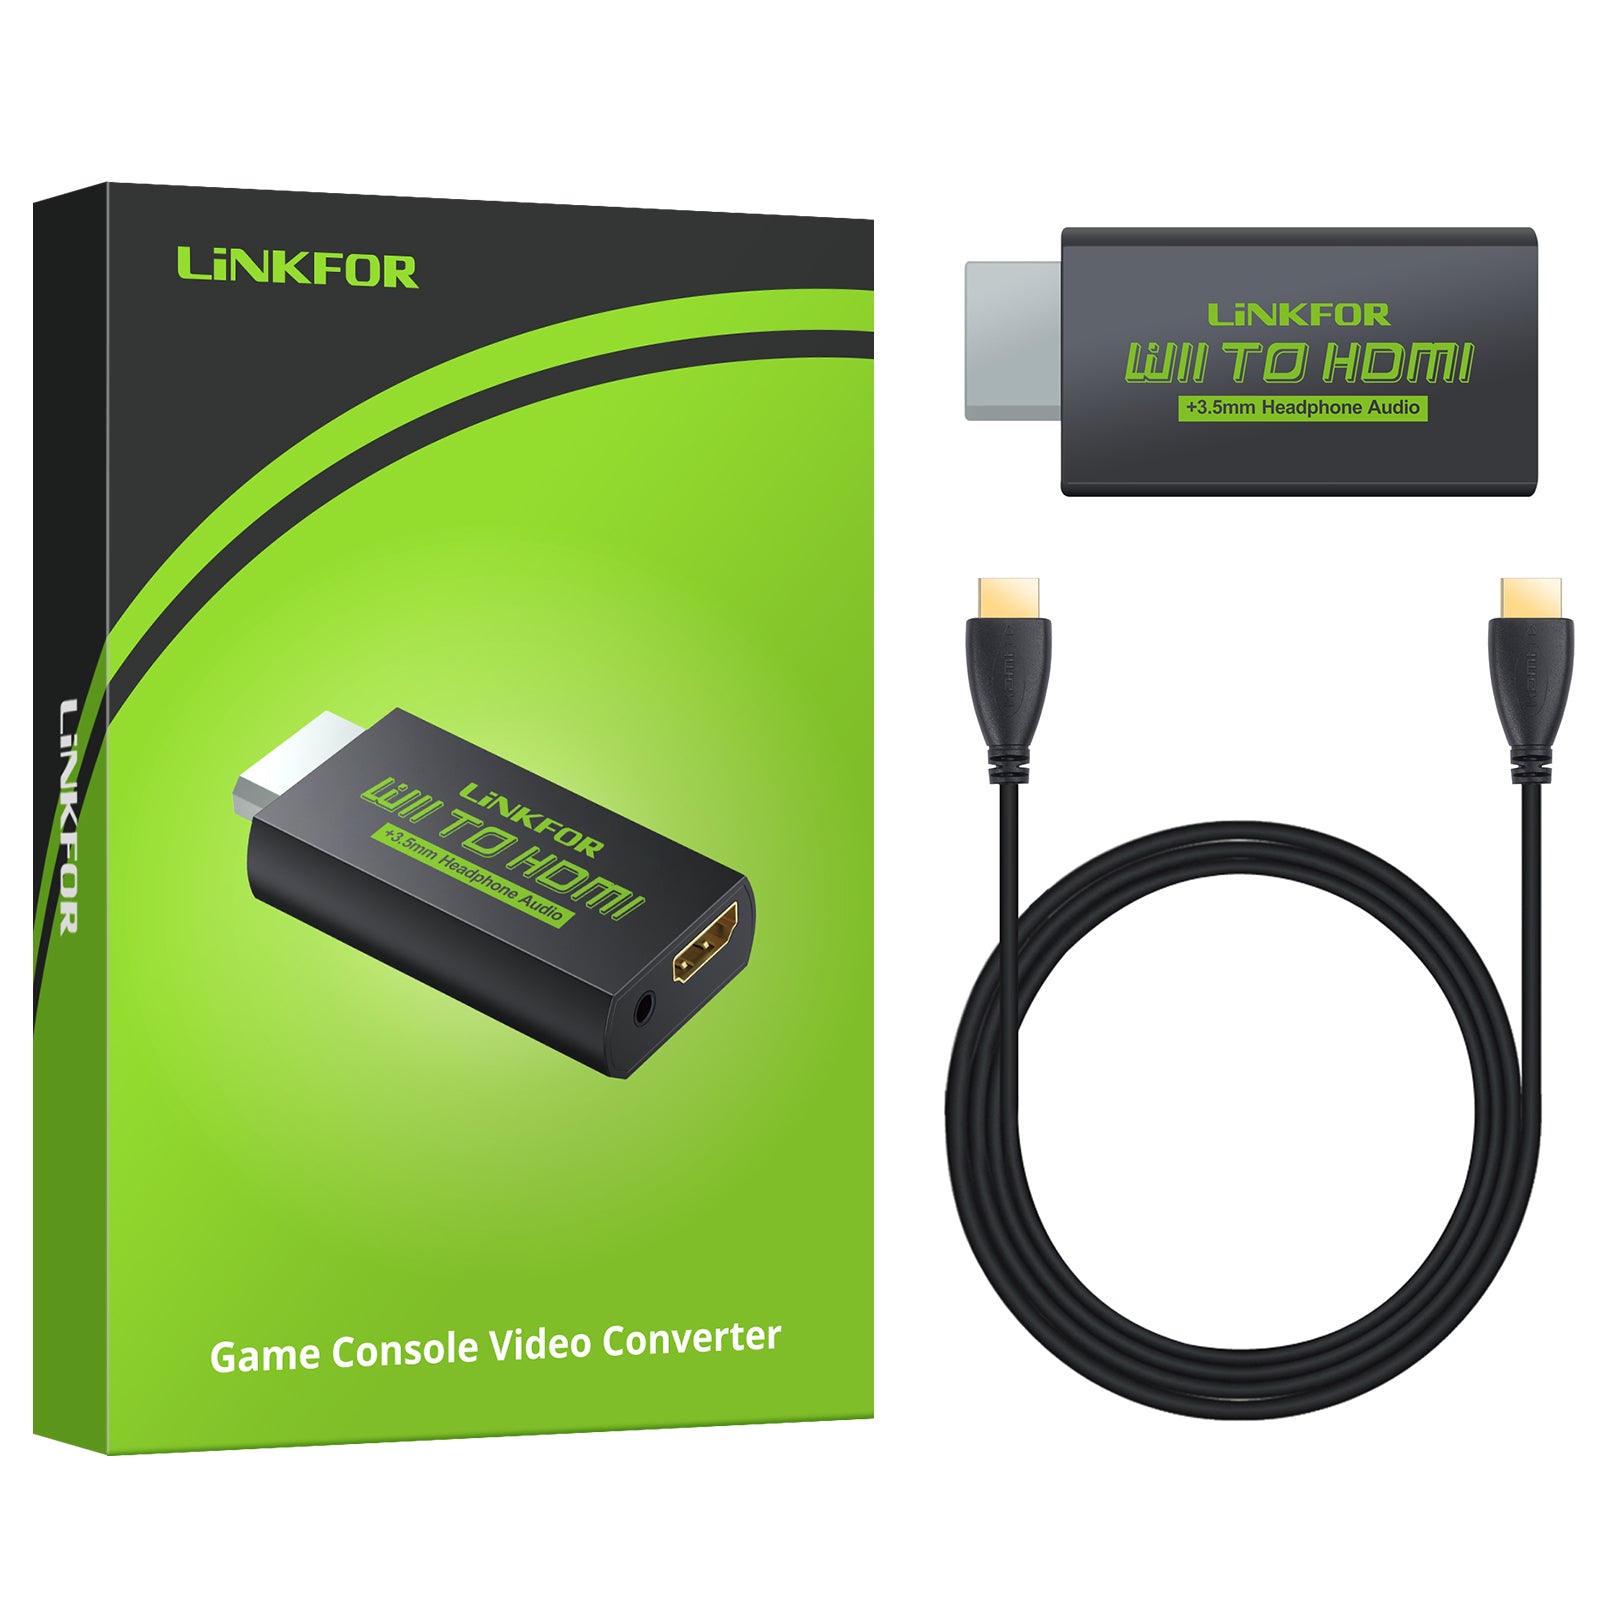 LiNKFOR Wii HDMI – LiNKFOR Store